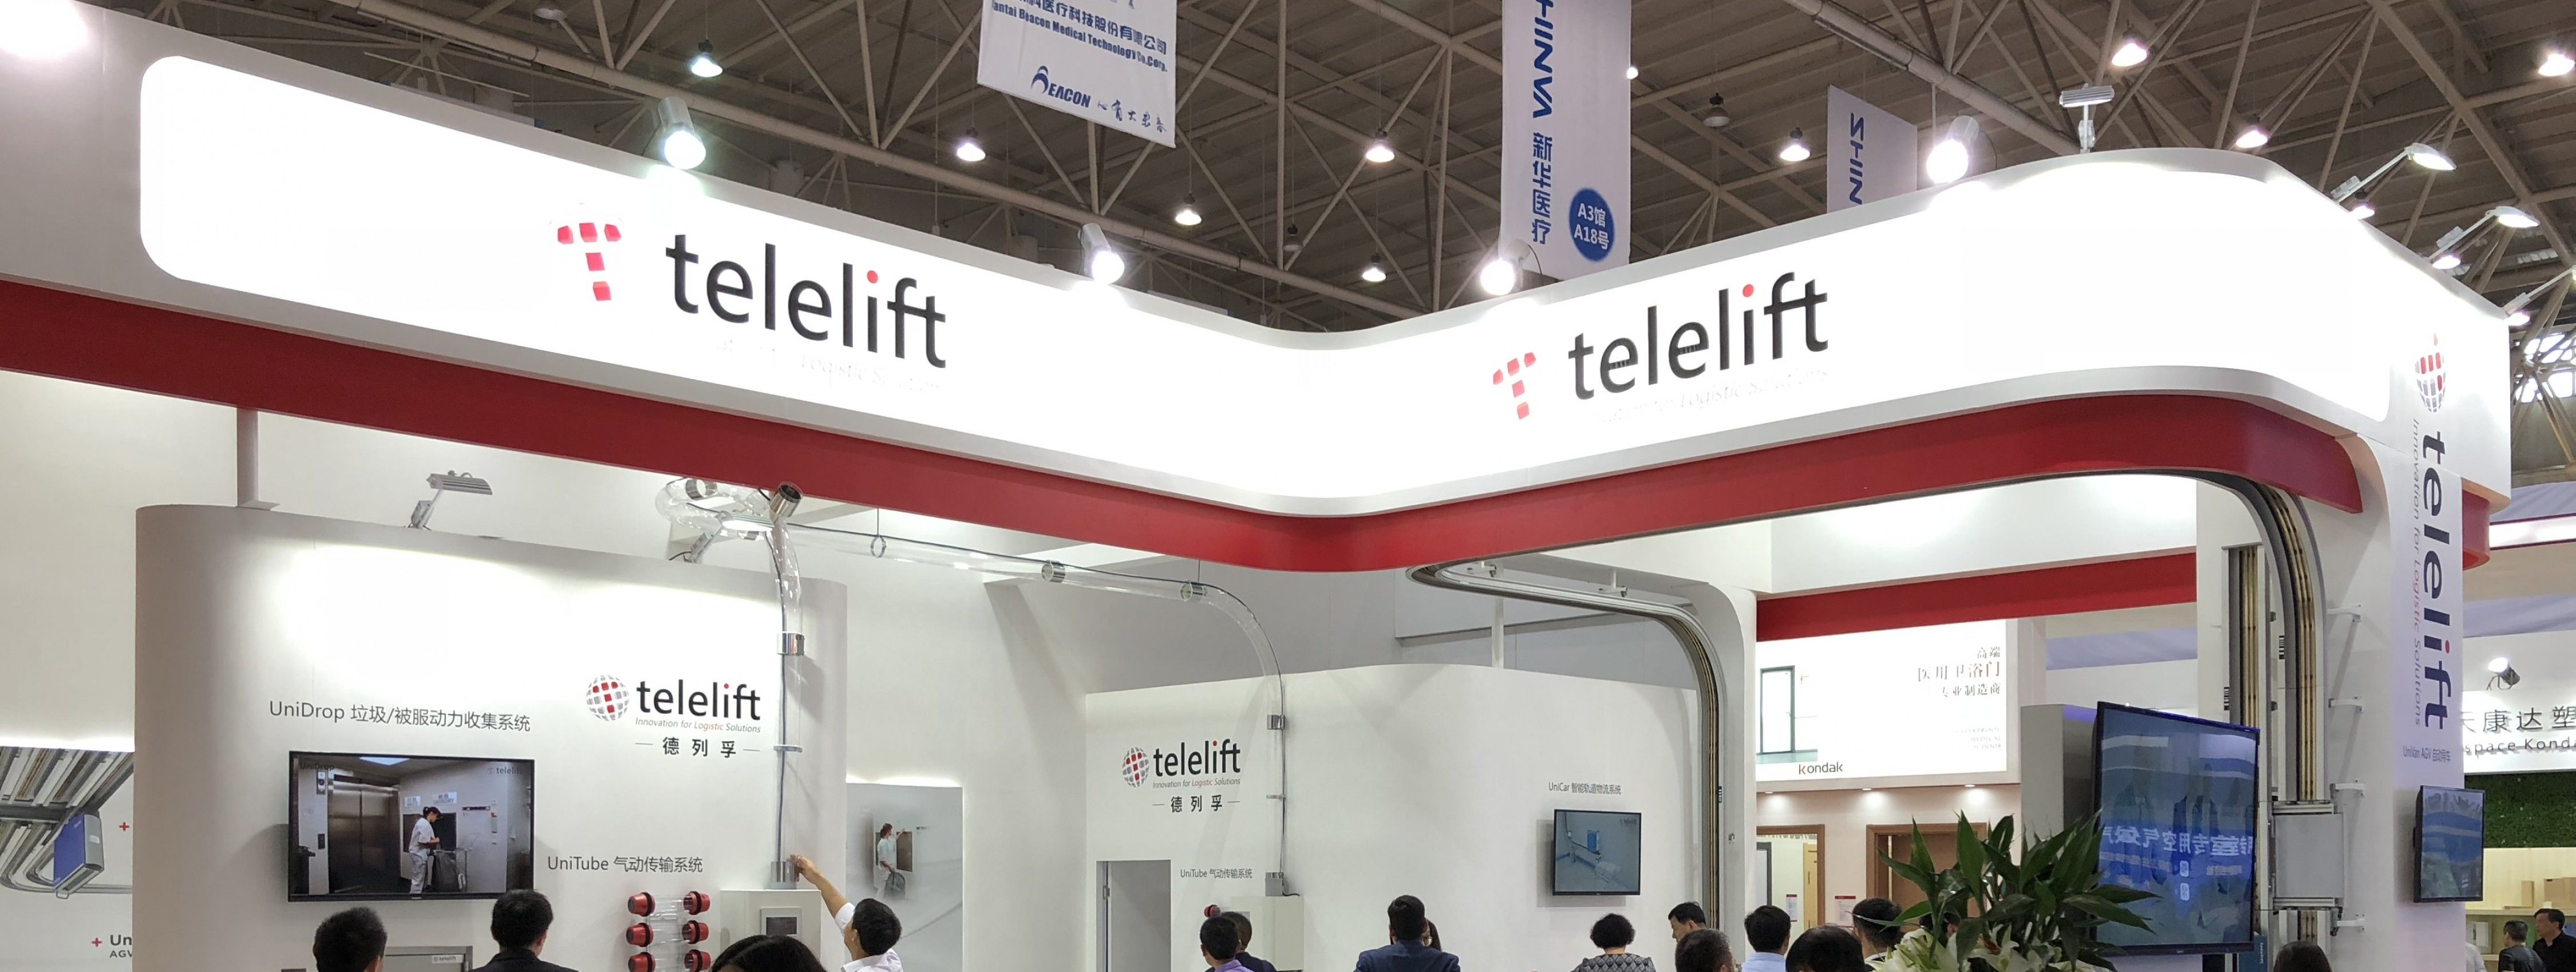 Telelift Events and Trade fairs